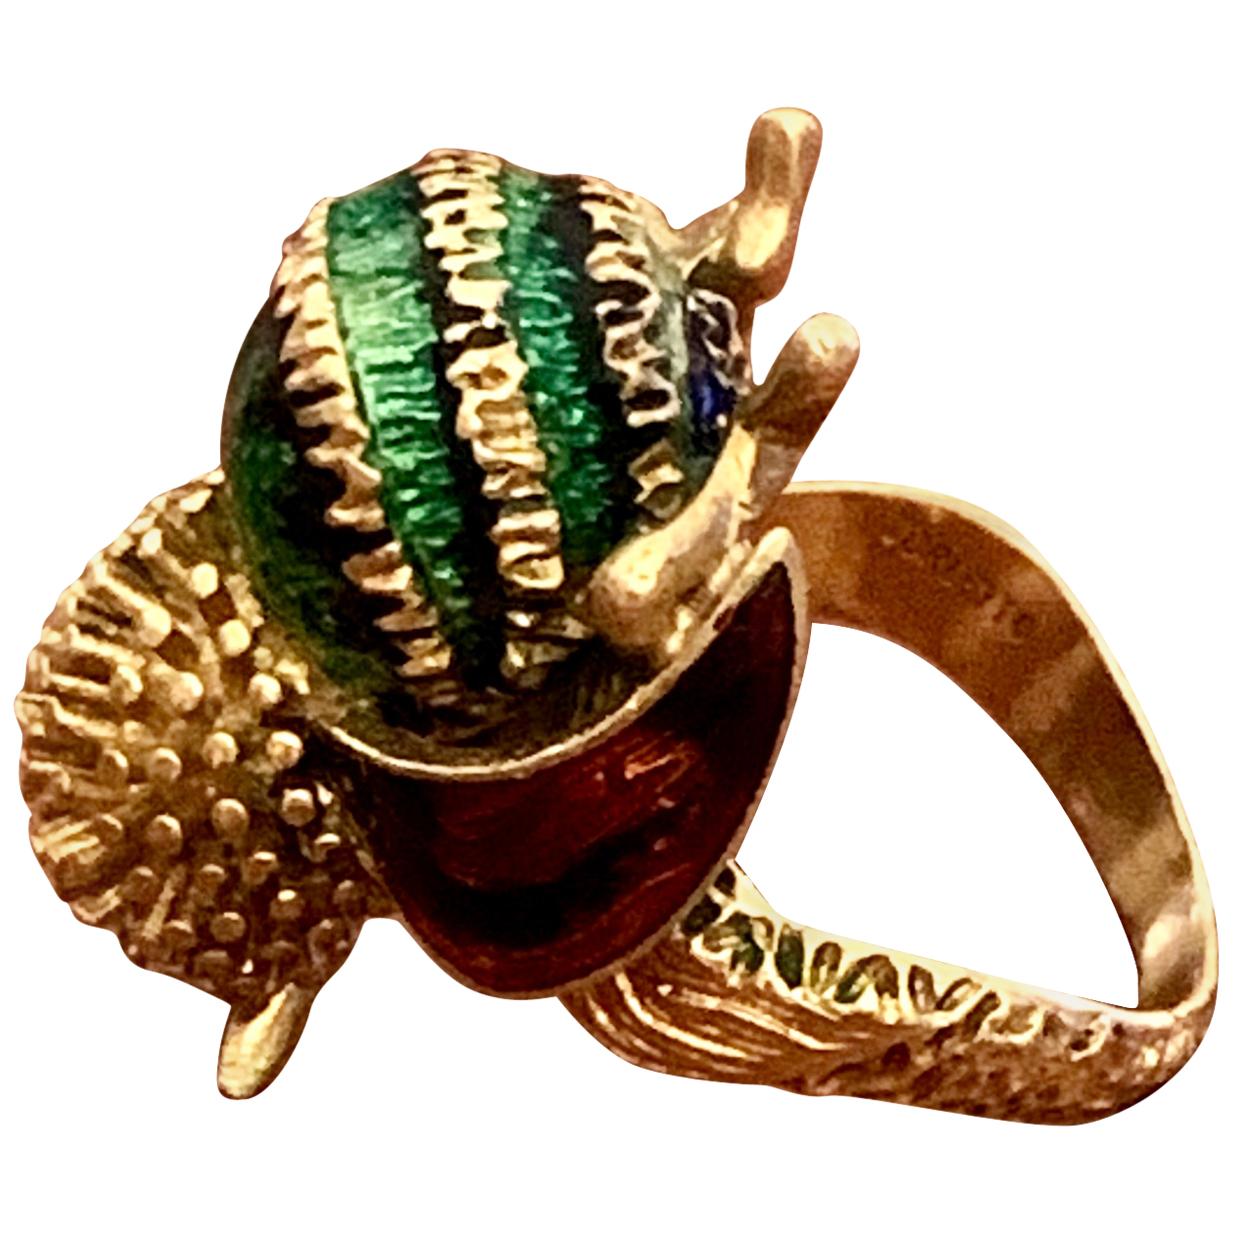 This vintage ring is from the 1950's-1960's.  It is a signed Corletto piece.  It is a fun bumble bee which is made of 18 karat yellow Gold and is accented with beautiful enamel work in colors of green, blue and red.  Overall, it is very intricately